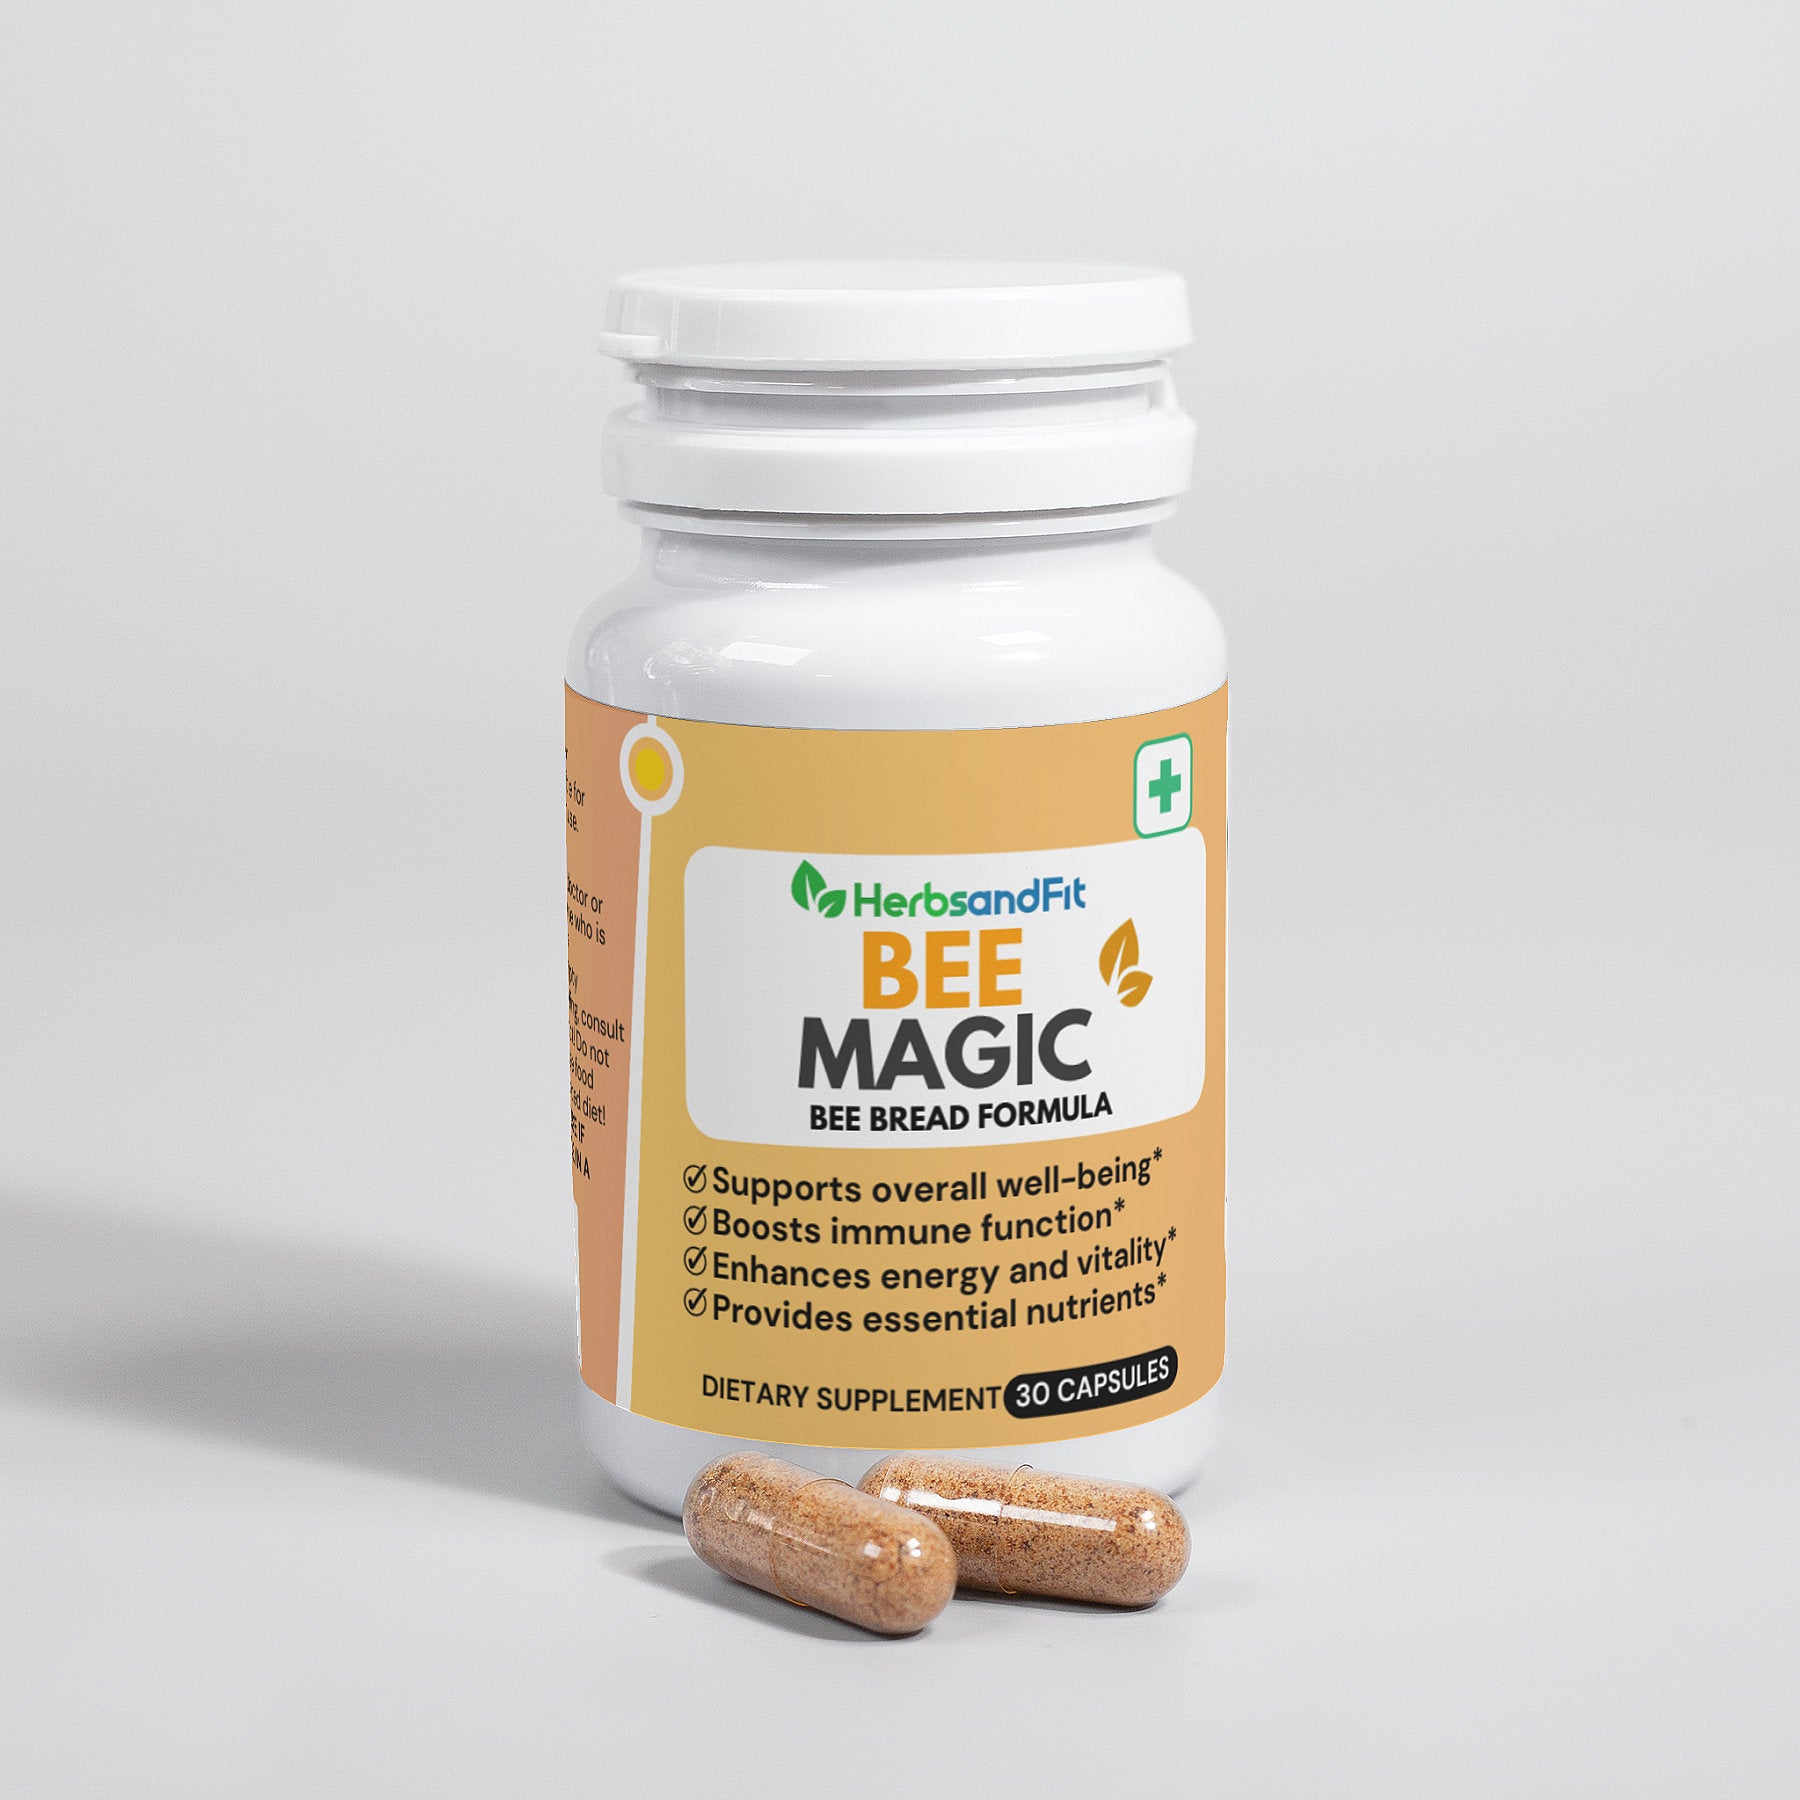 Bee Magic: Natural Immunity and Energy Support